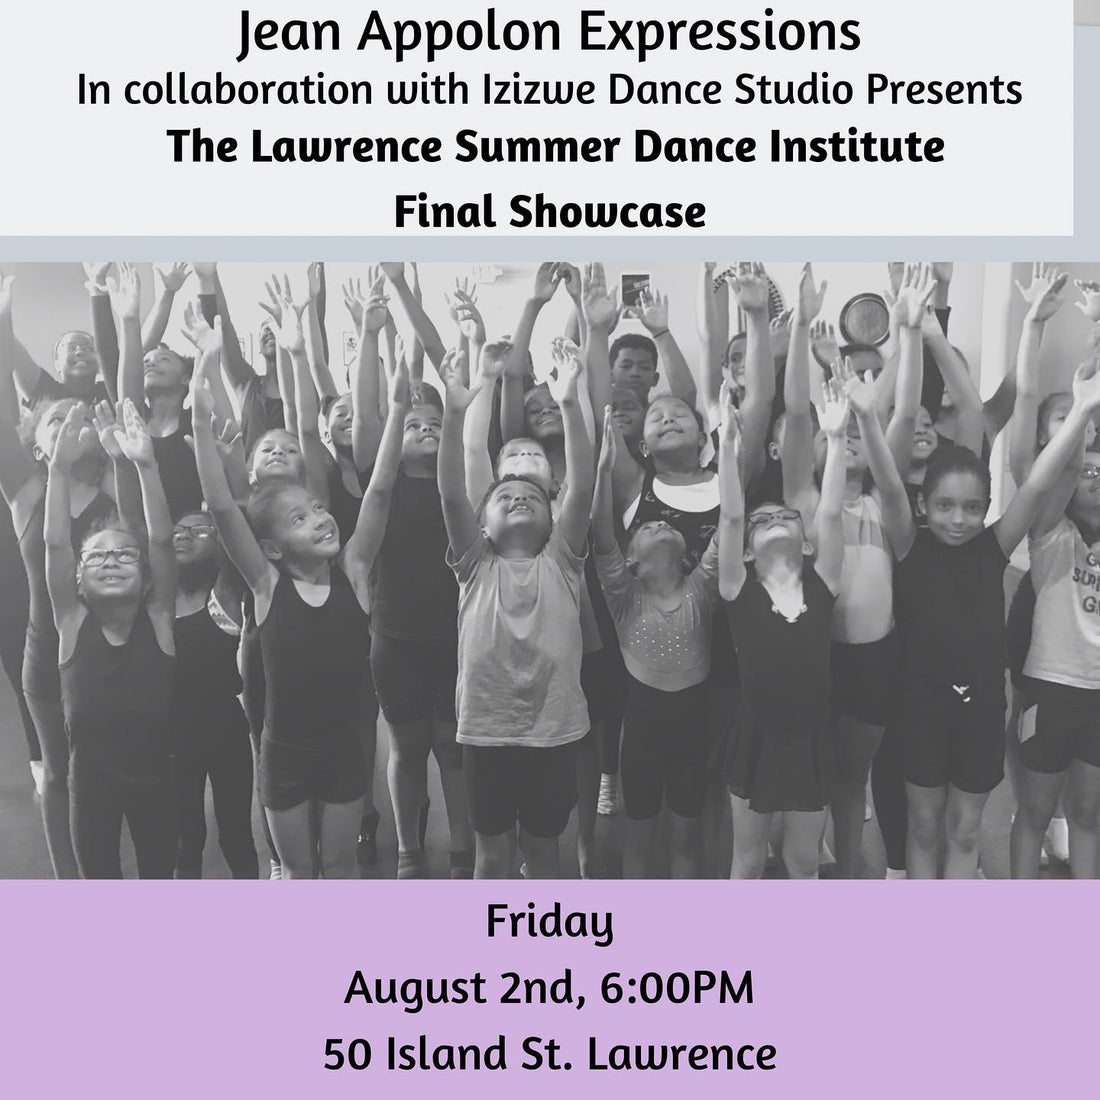 Summer Dance Institute- Partnership with Jean Appolon Expressions